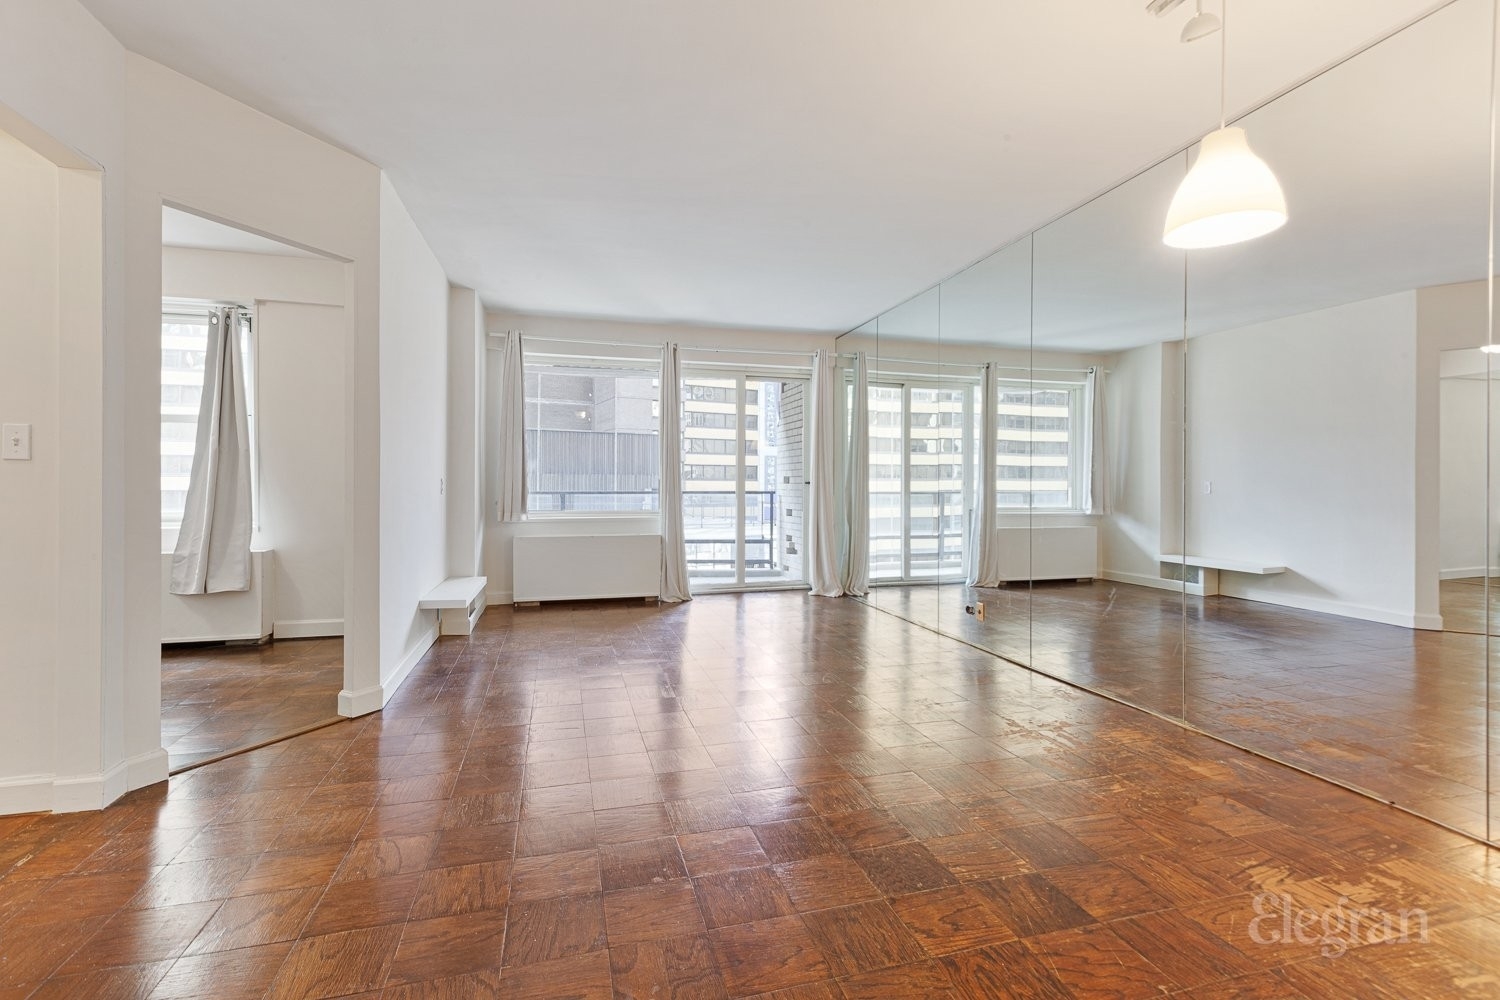 Property at Tower 53, 159 W 53RD ST, 21C Midtown West, New York, New York 10019